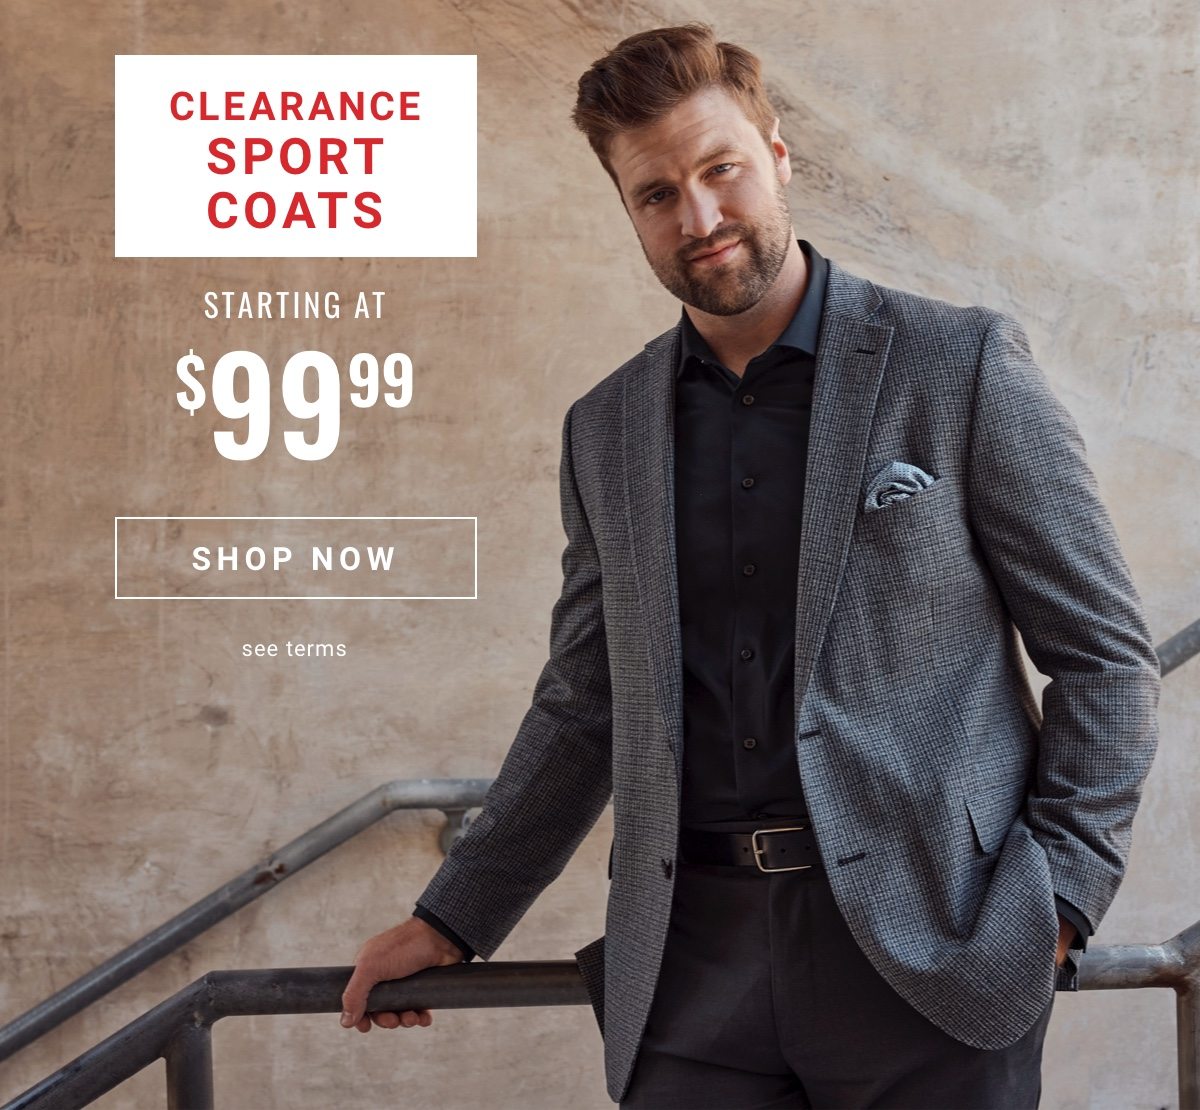 Clearance sport coats starting at 99 99